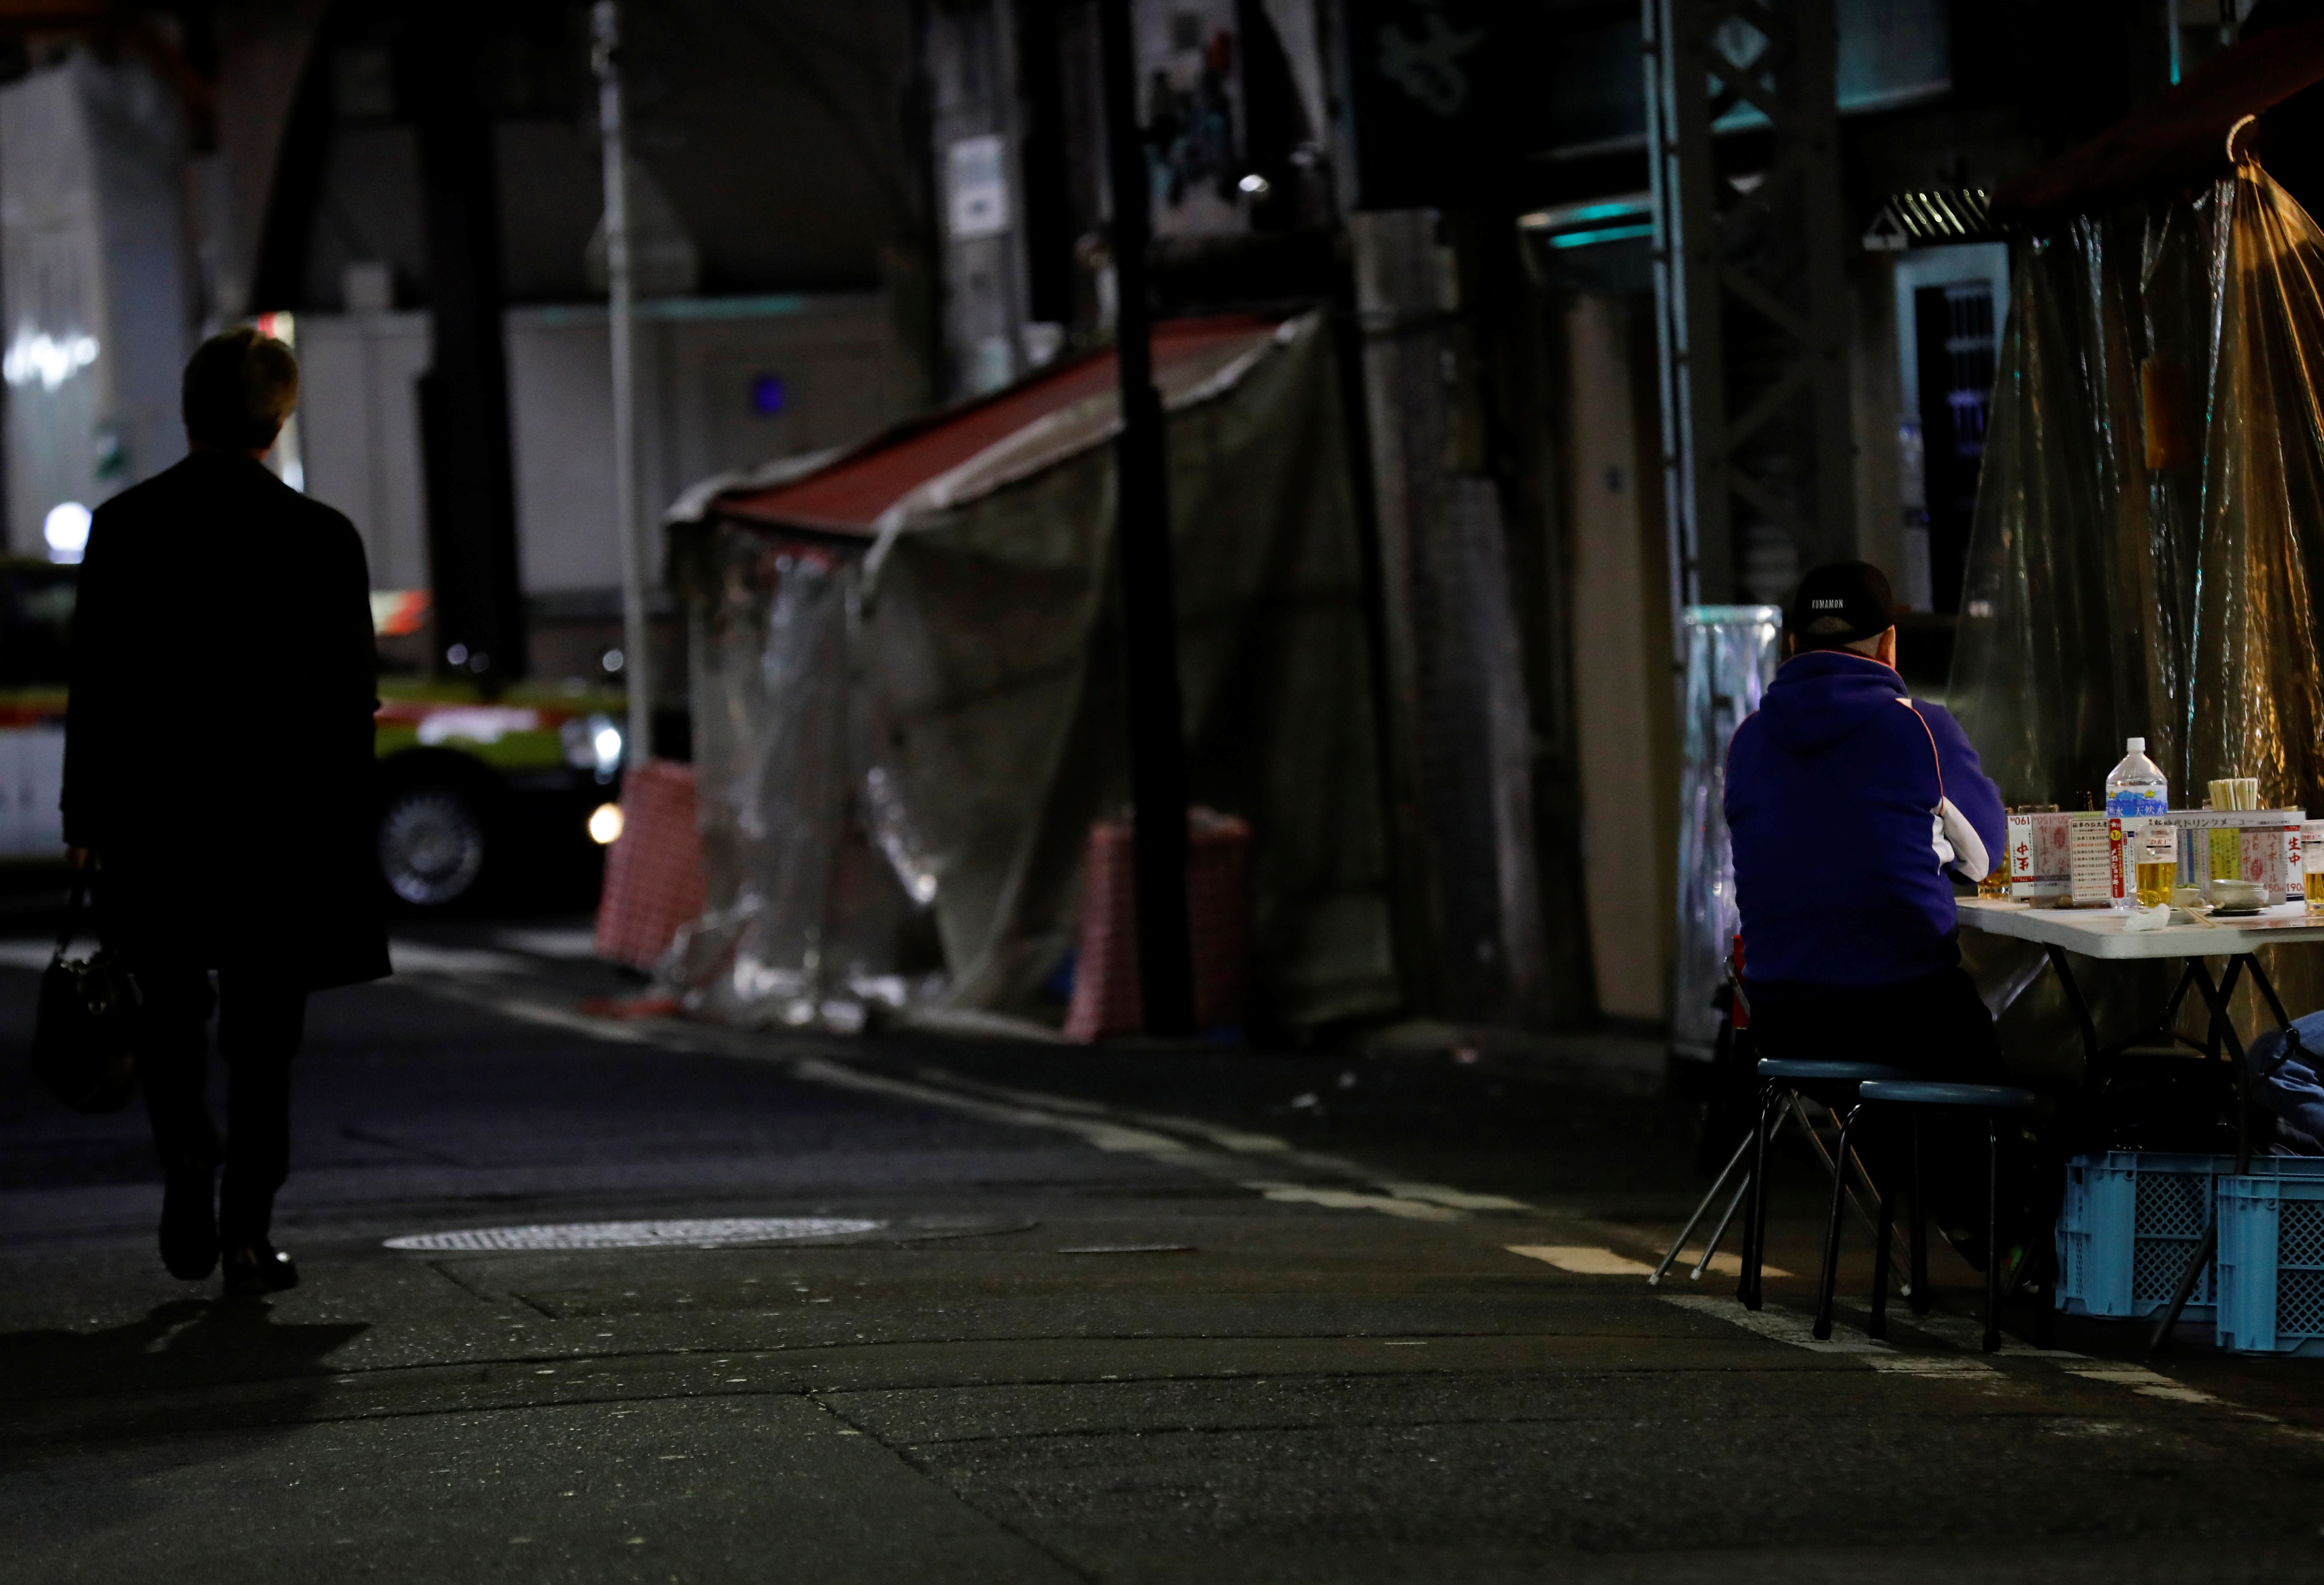 A man drinks at the table outside a bar which opens after 8 PM, the time the government asks restaurants and bars to close by, amid the coronavirus state of emergency in Tokyo, Japan, January 15, 2021. Picture taken January 15, 2021. REUTERS/Kim Kyung-Hoon